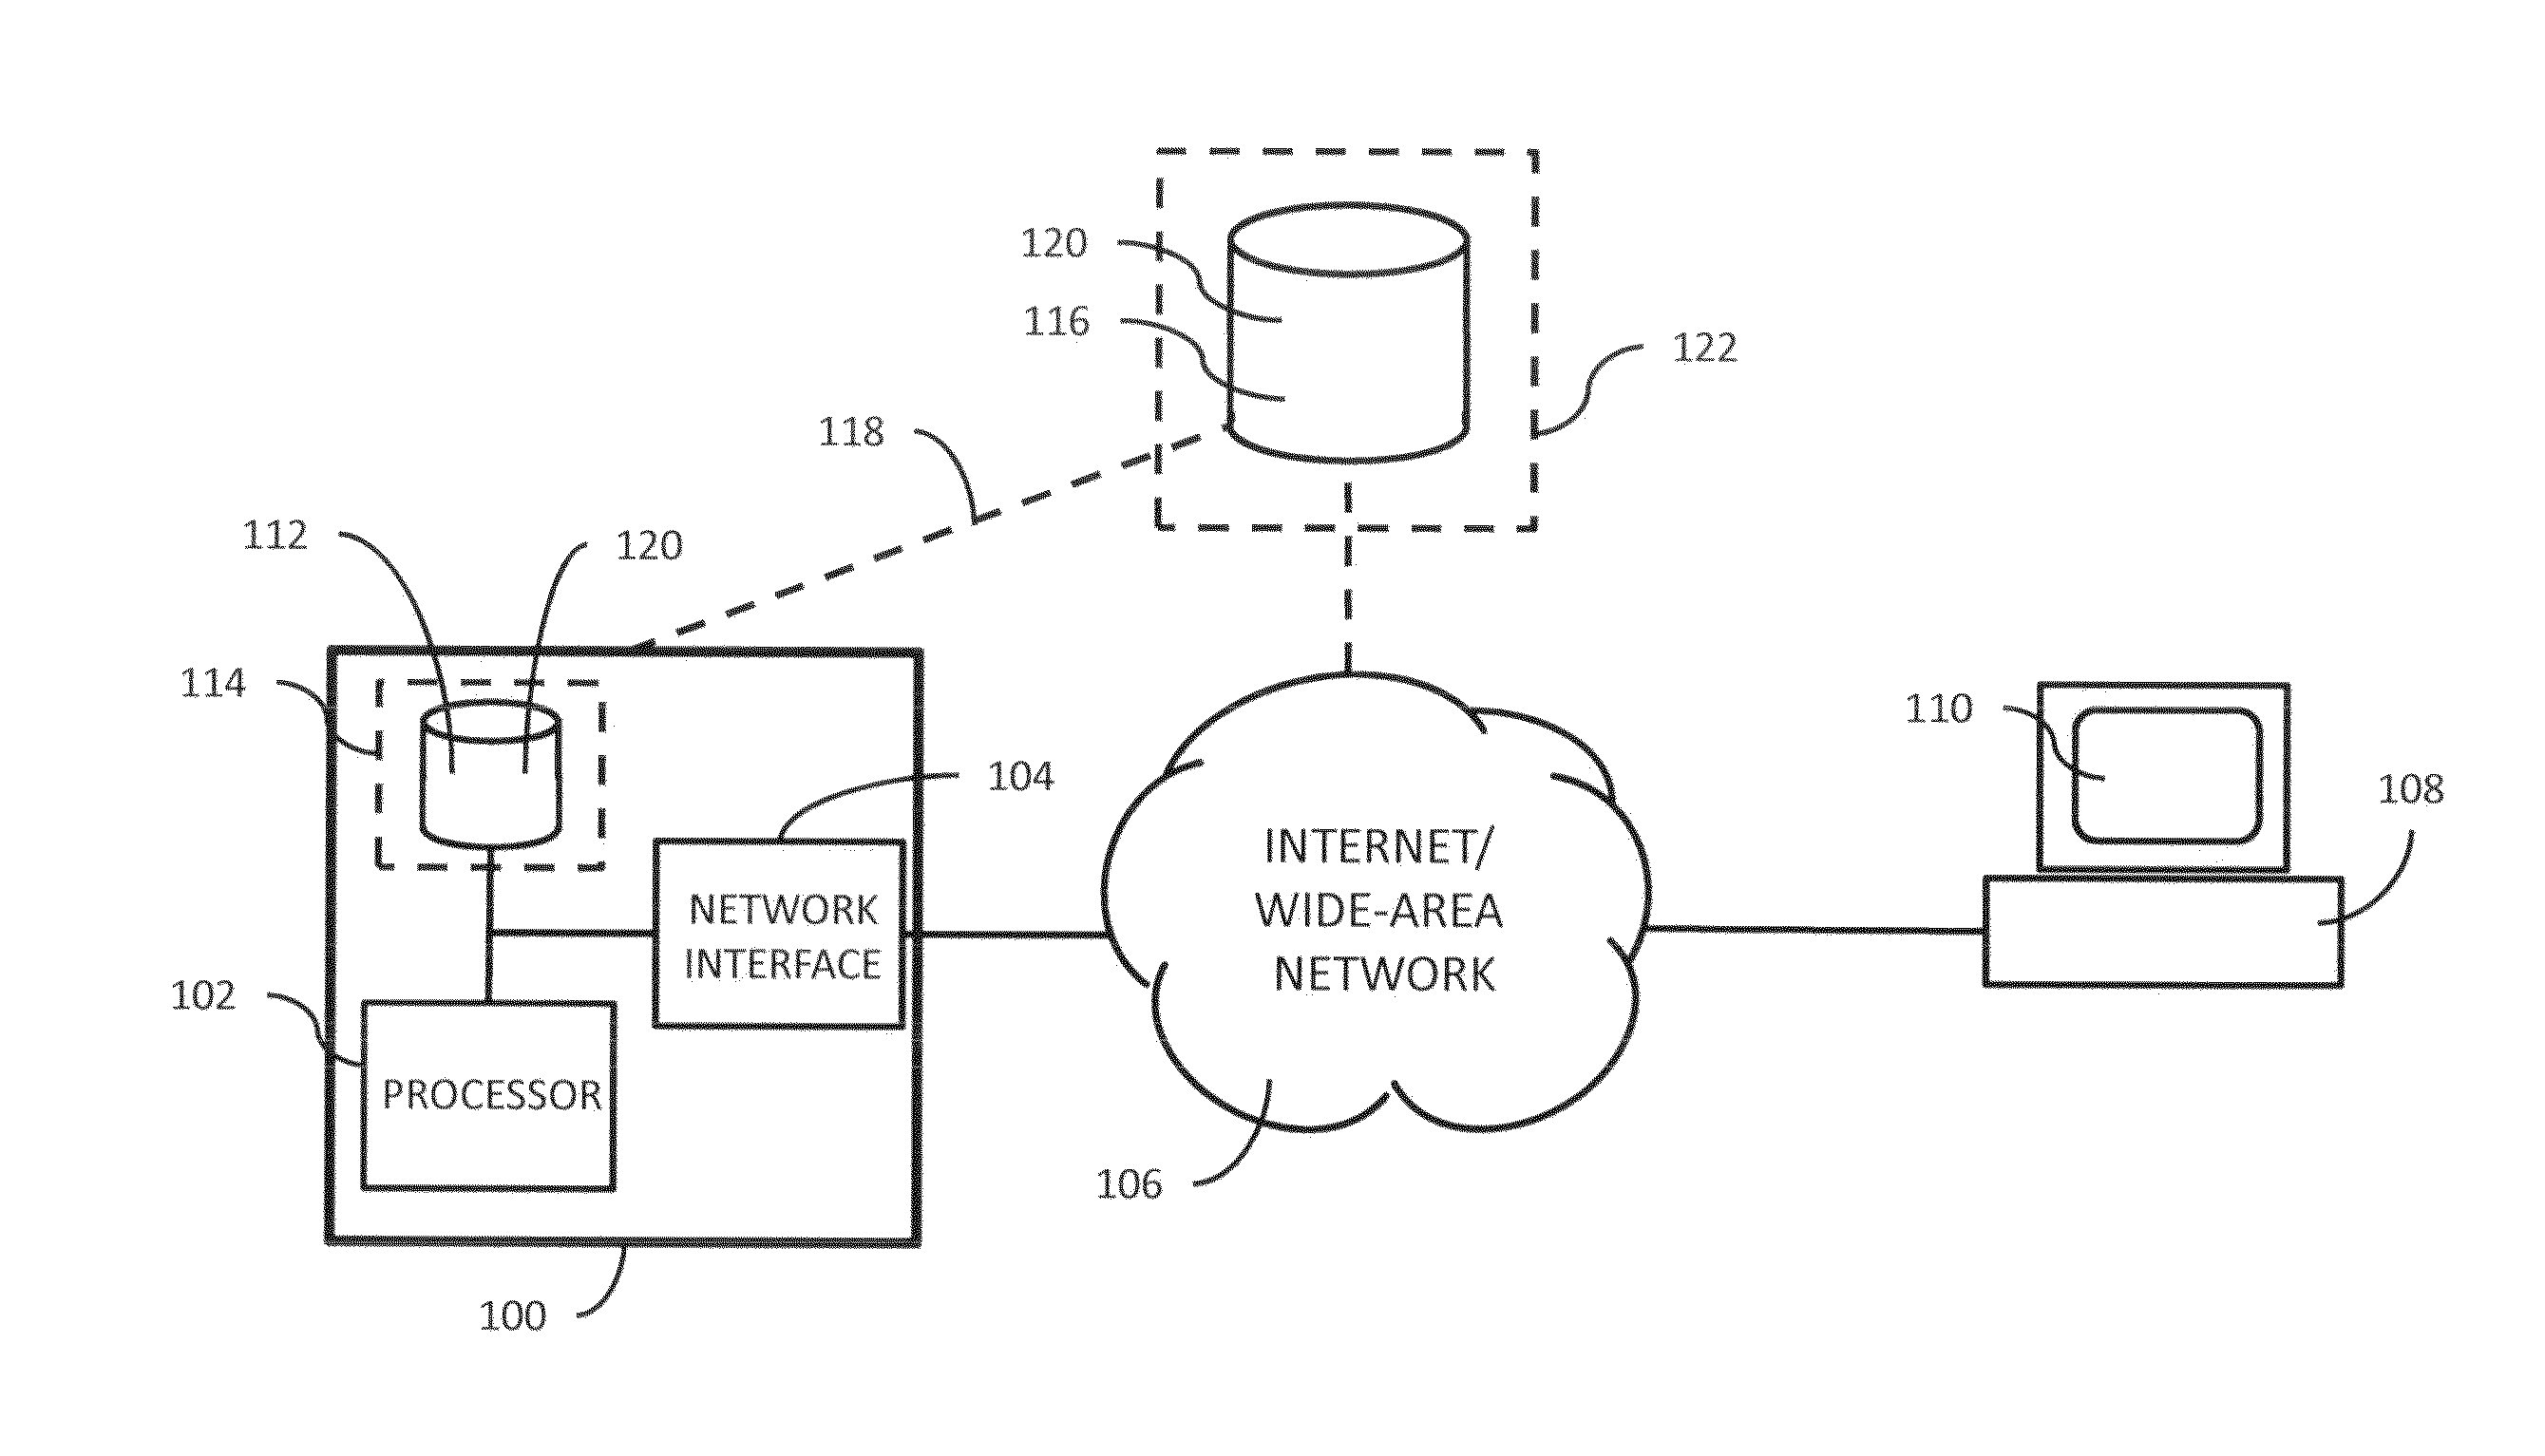 System and methods for proposing media for a web page